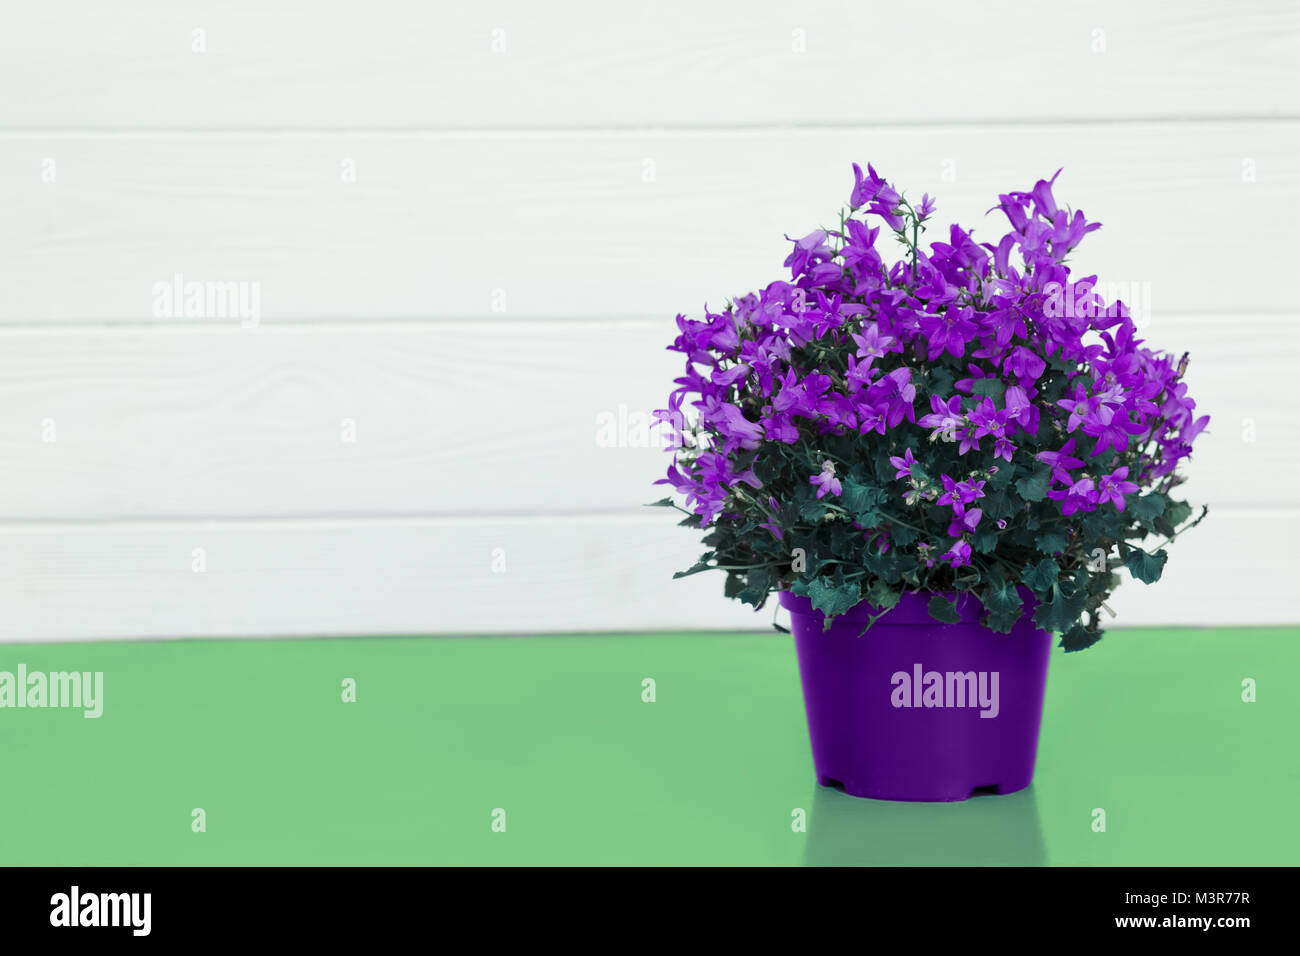 violet flower in a pot on a turquoise table Stock Photo